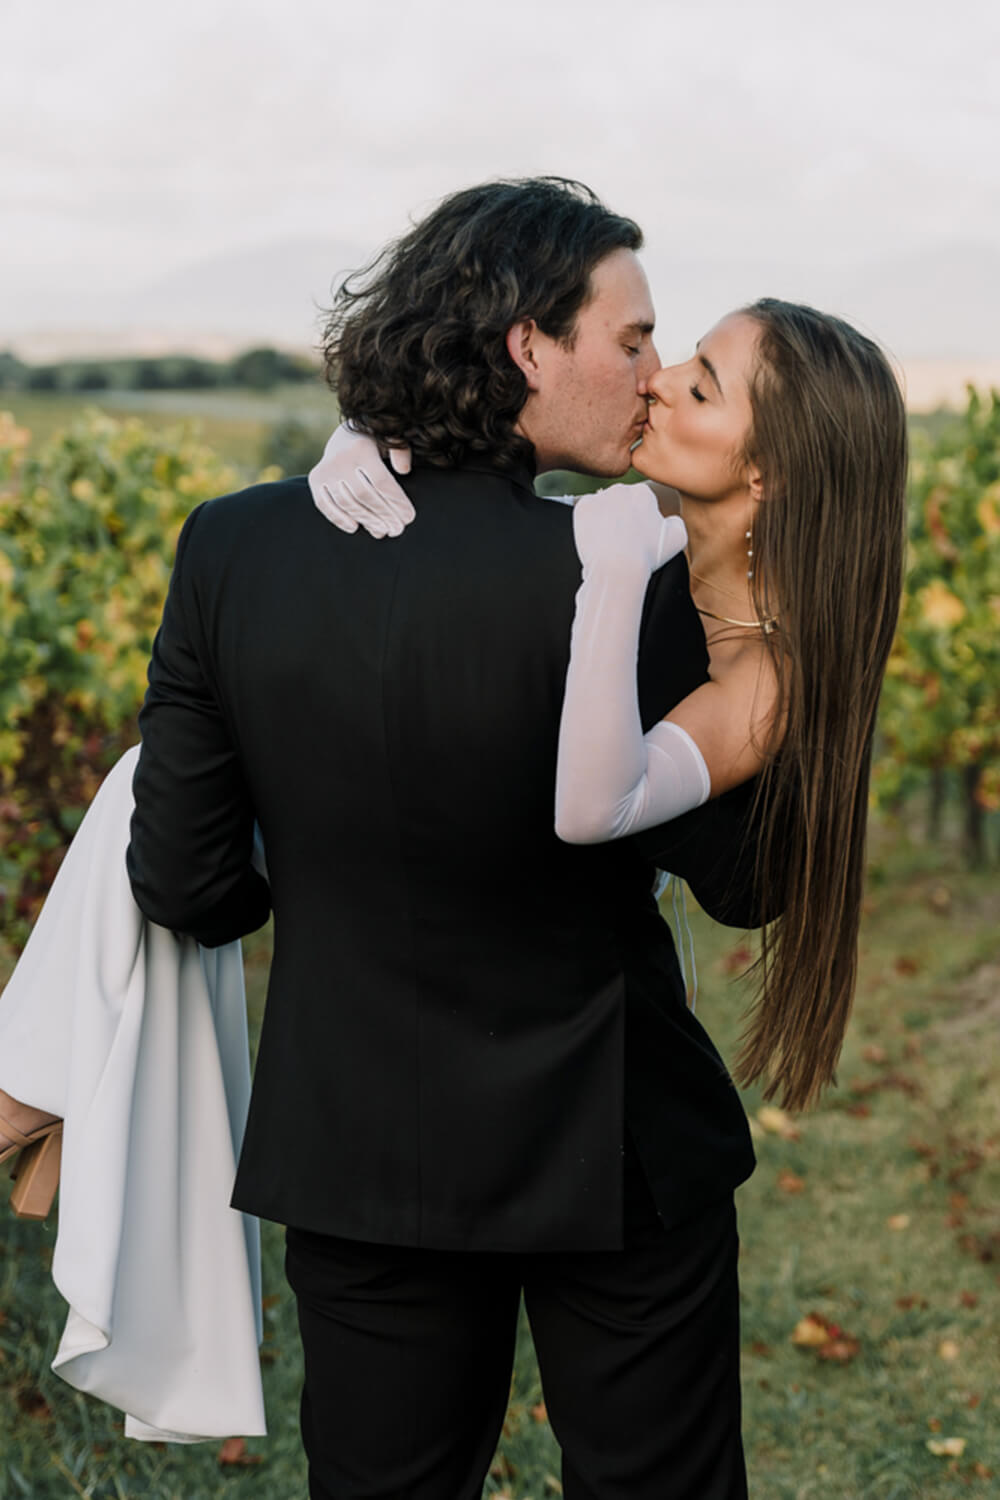 Engagement Shoot Mistakes To Avoid, Lovely couple showing their love by kissing. Captured by Black Avenue Productions